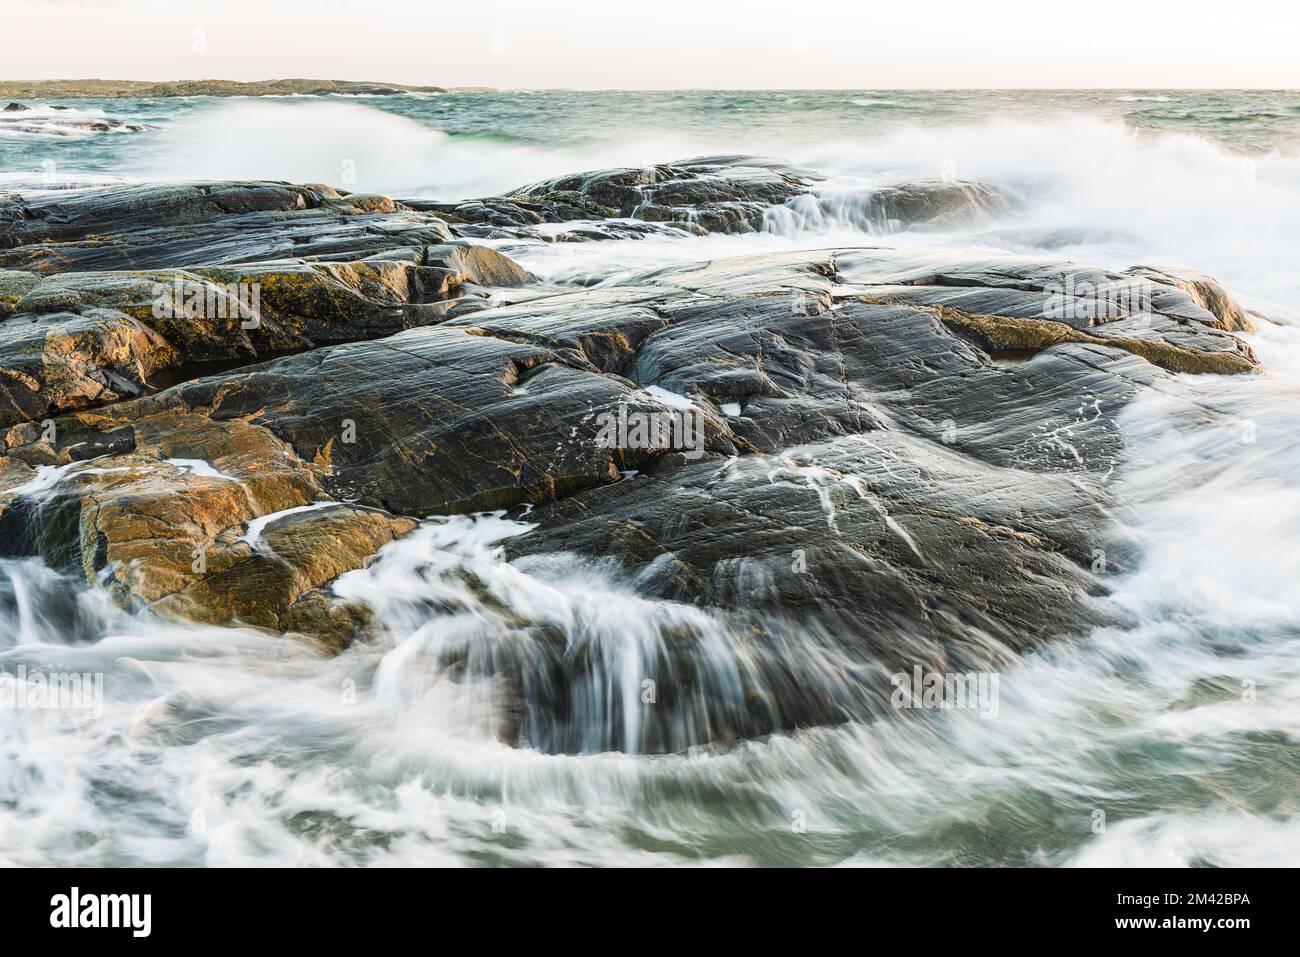 Waves crashing on rocks a stormy day, Sweden. Stock Photo